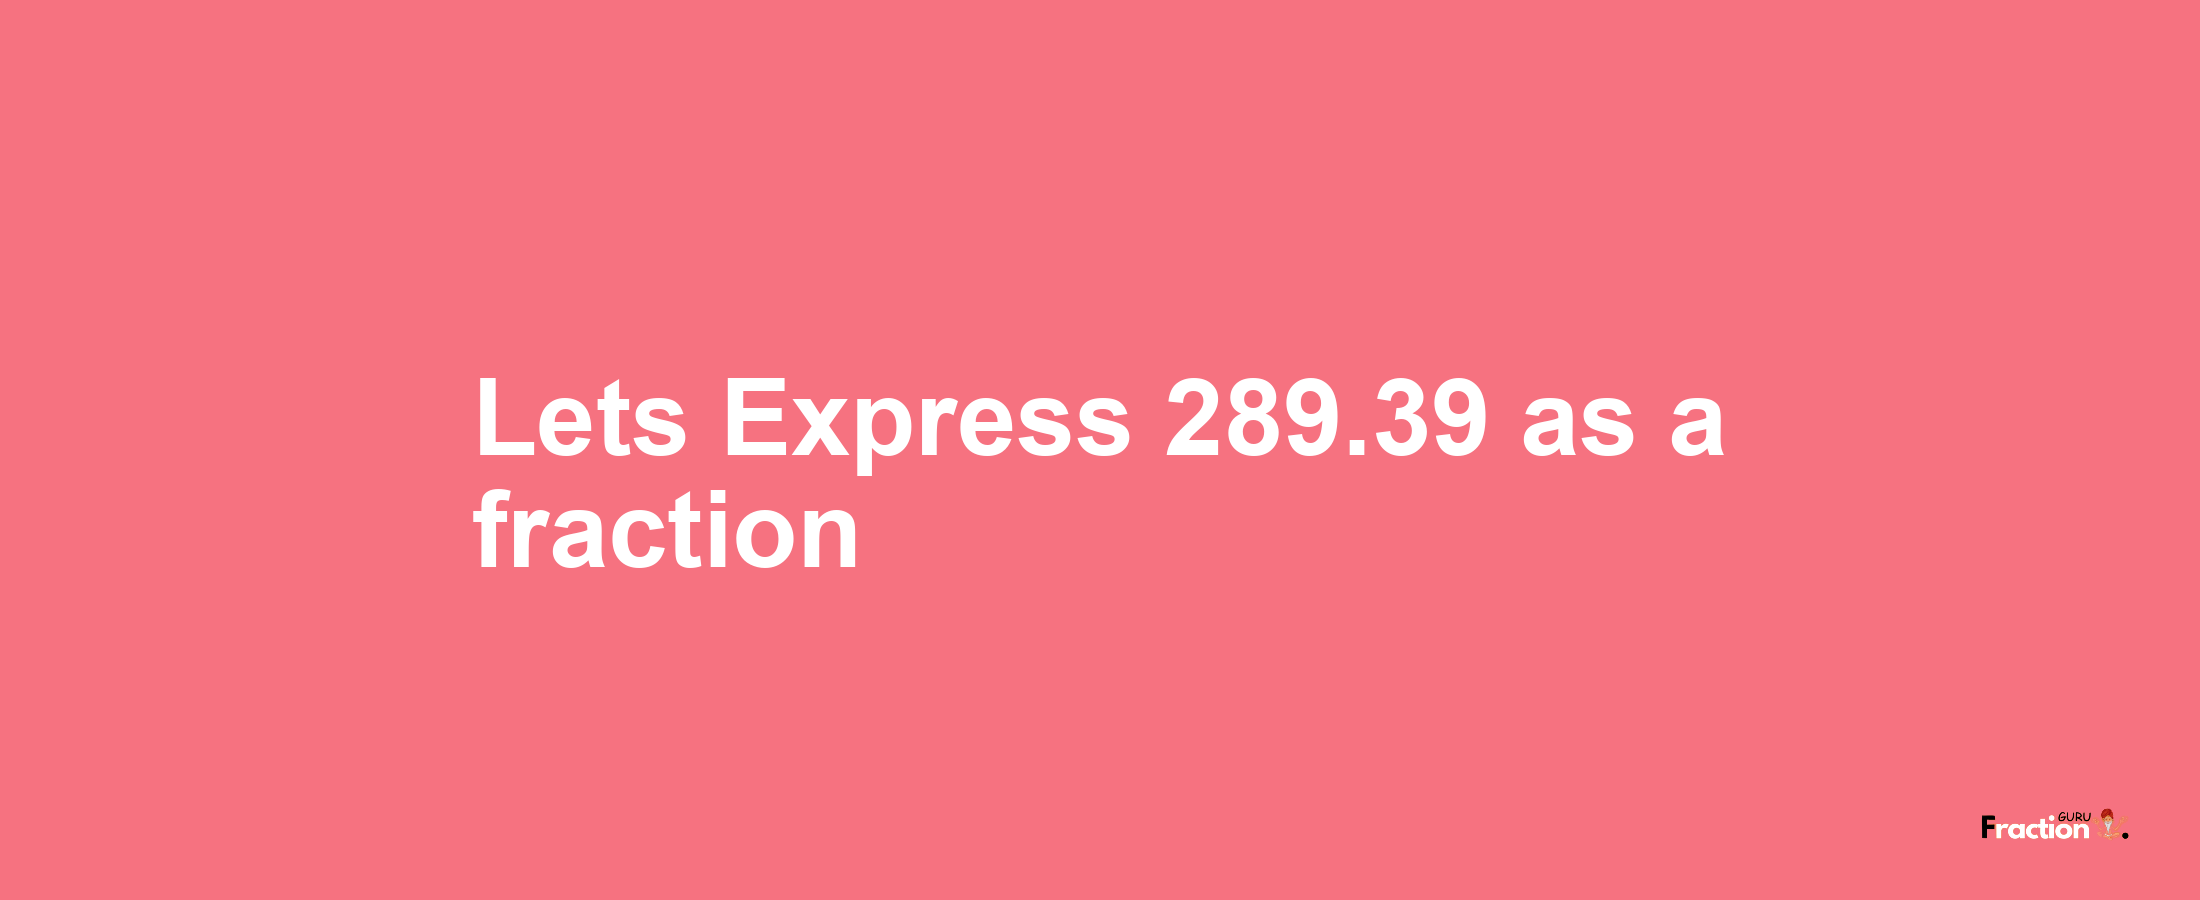 Lets Express 289.39 as afraction